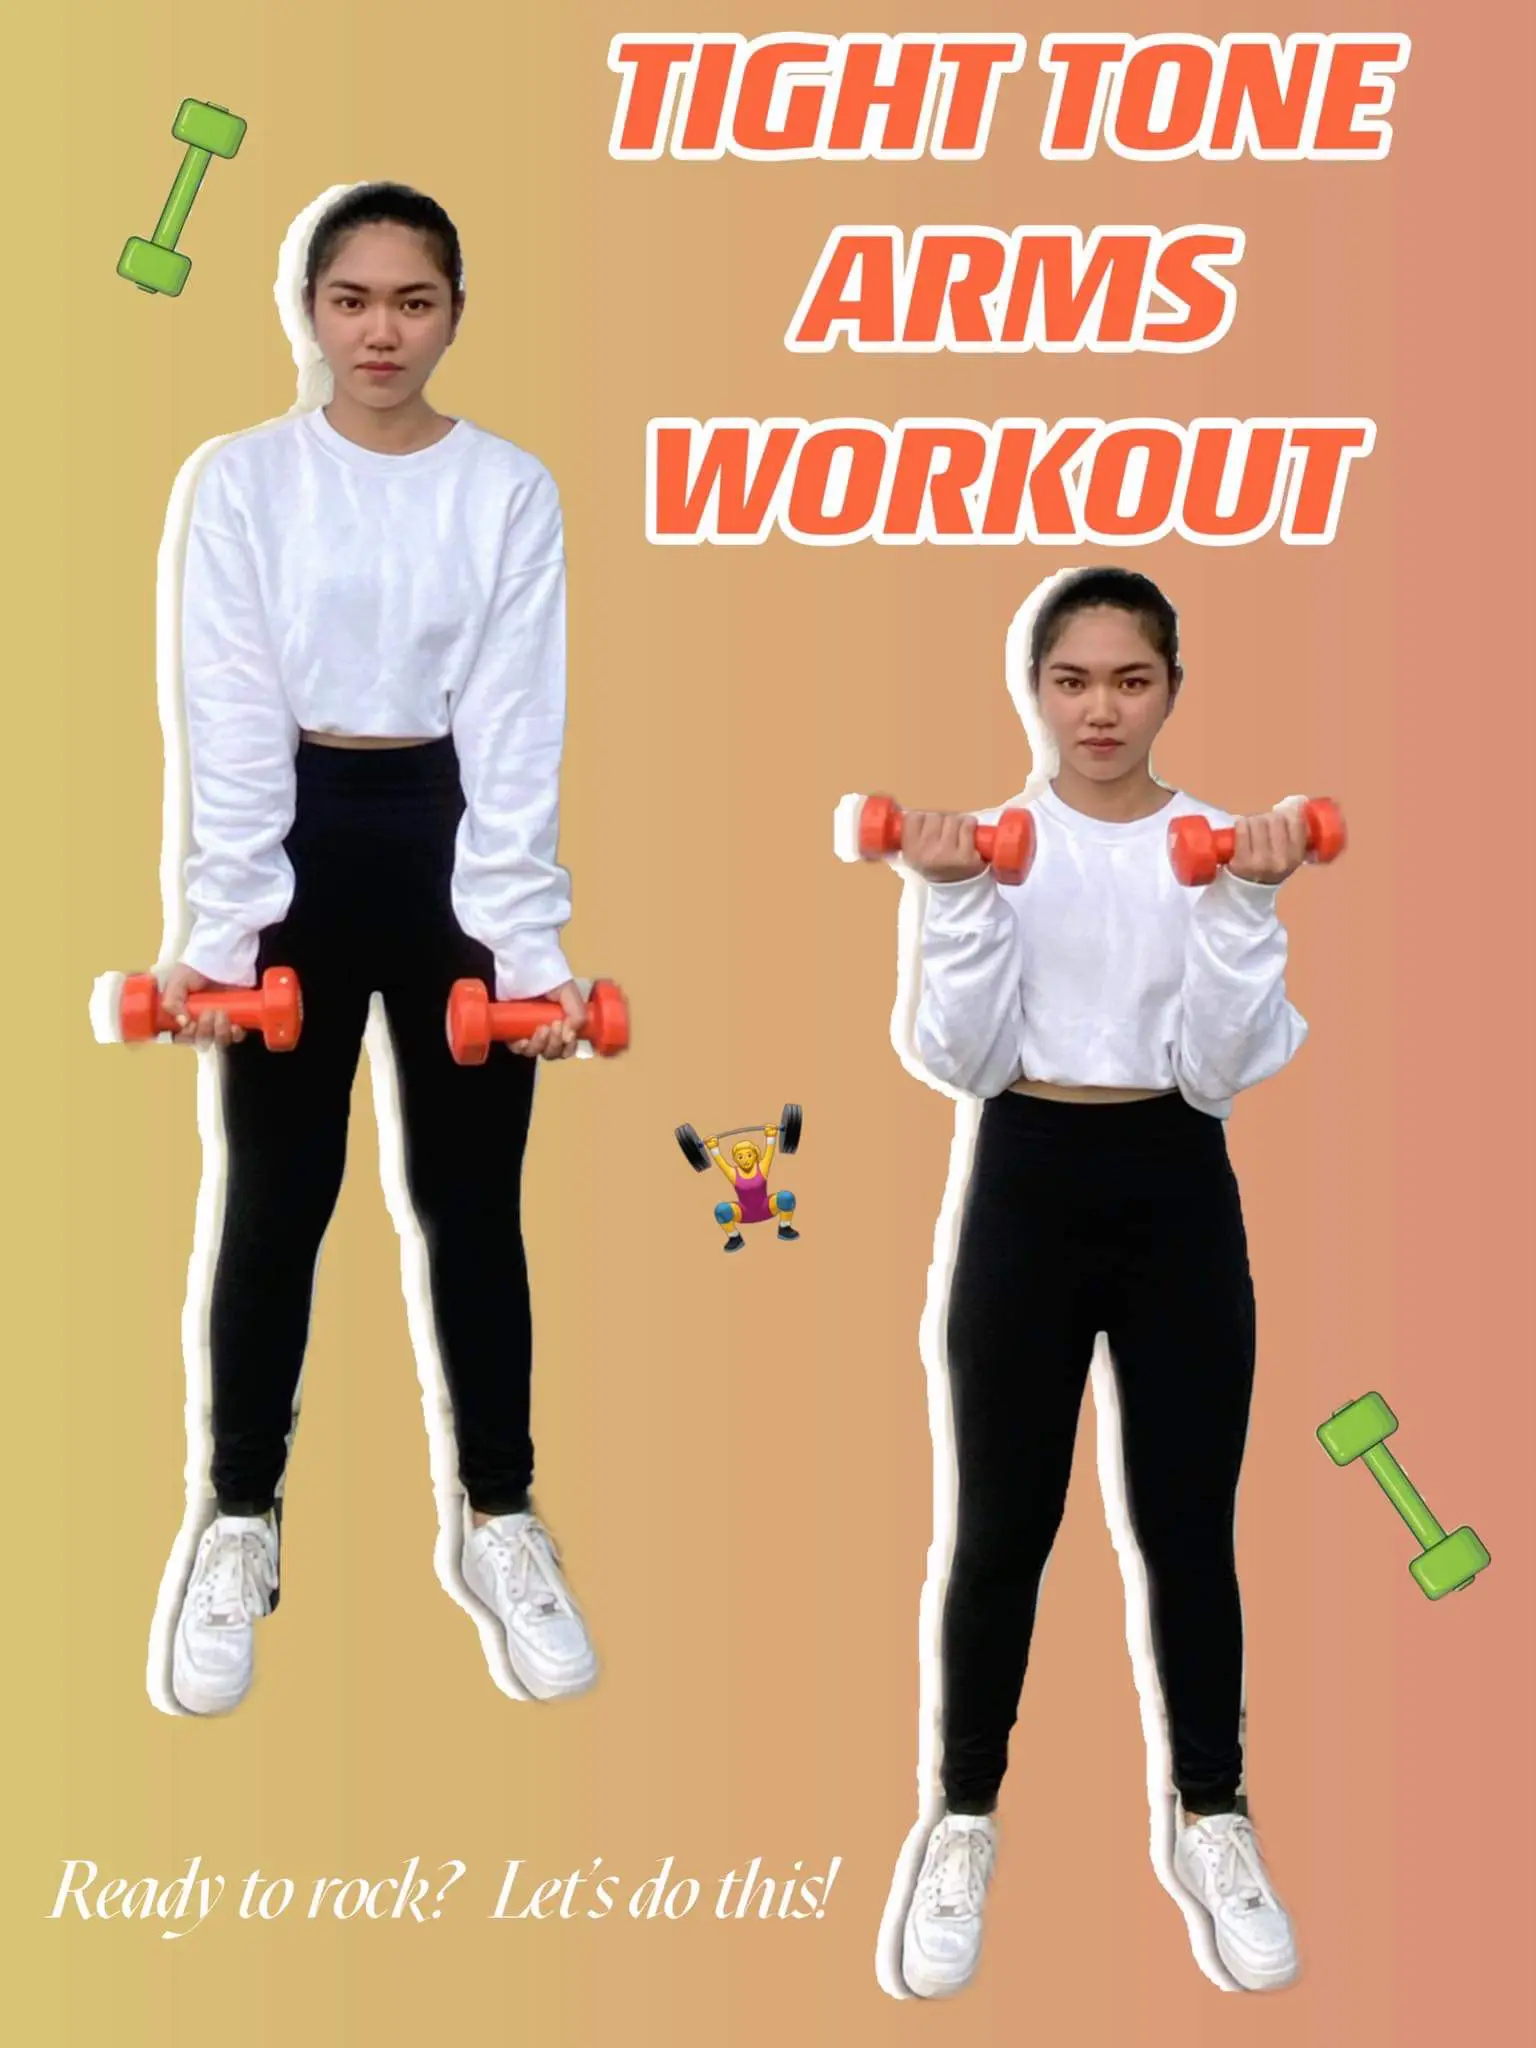 Dumbbell Arm Workout for Tight, Toned Arms